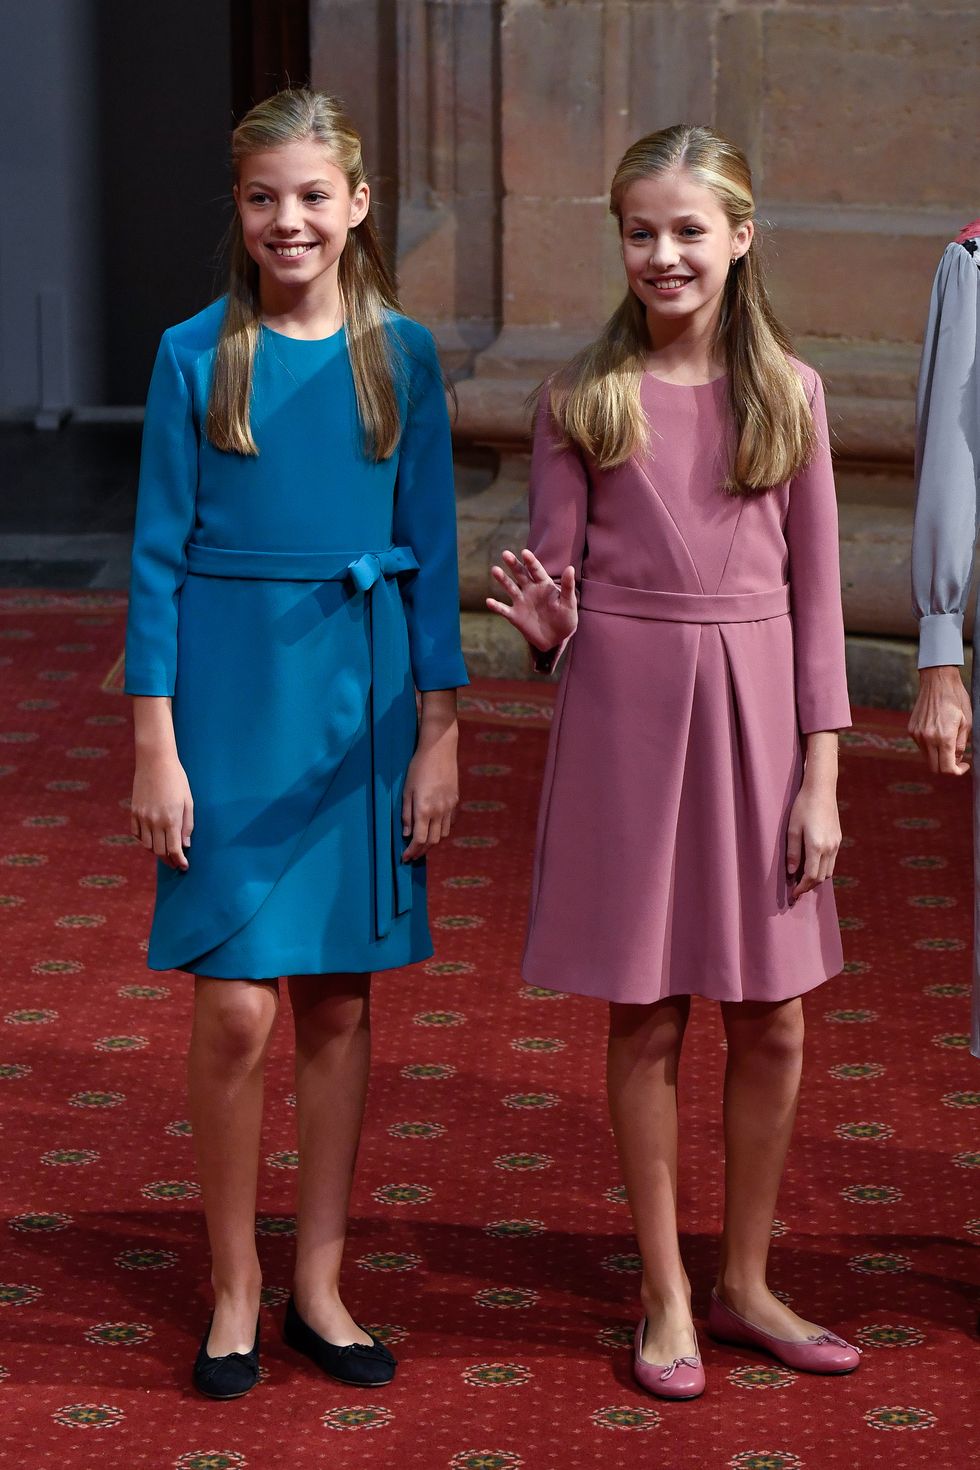 oviedo, spain october 18 l r princess sofia of spain and princess leonor of spain attend several audiences to congratulate the winners at the reconquista hotel during the princesa de asturias awards 2019 on october 18, 2019 in oviedo, spain photo by carlos r alvarezwireimage